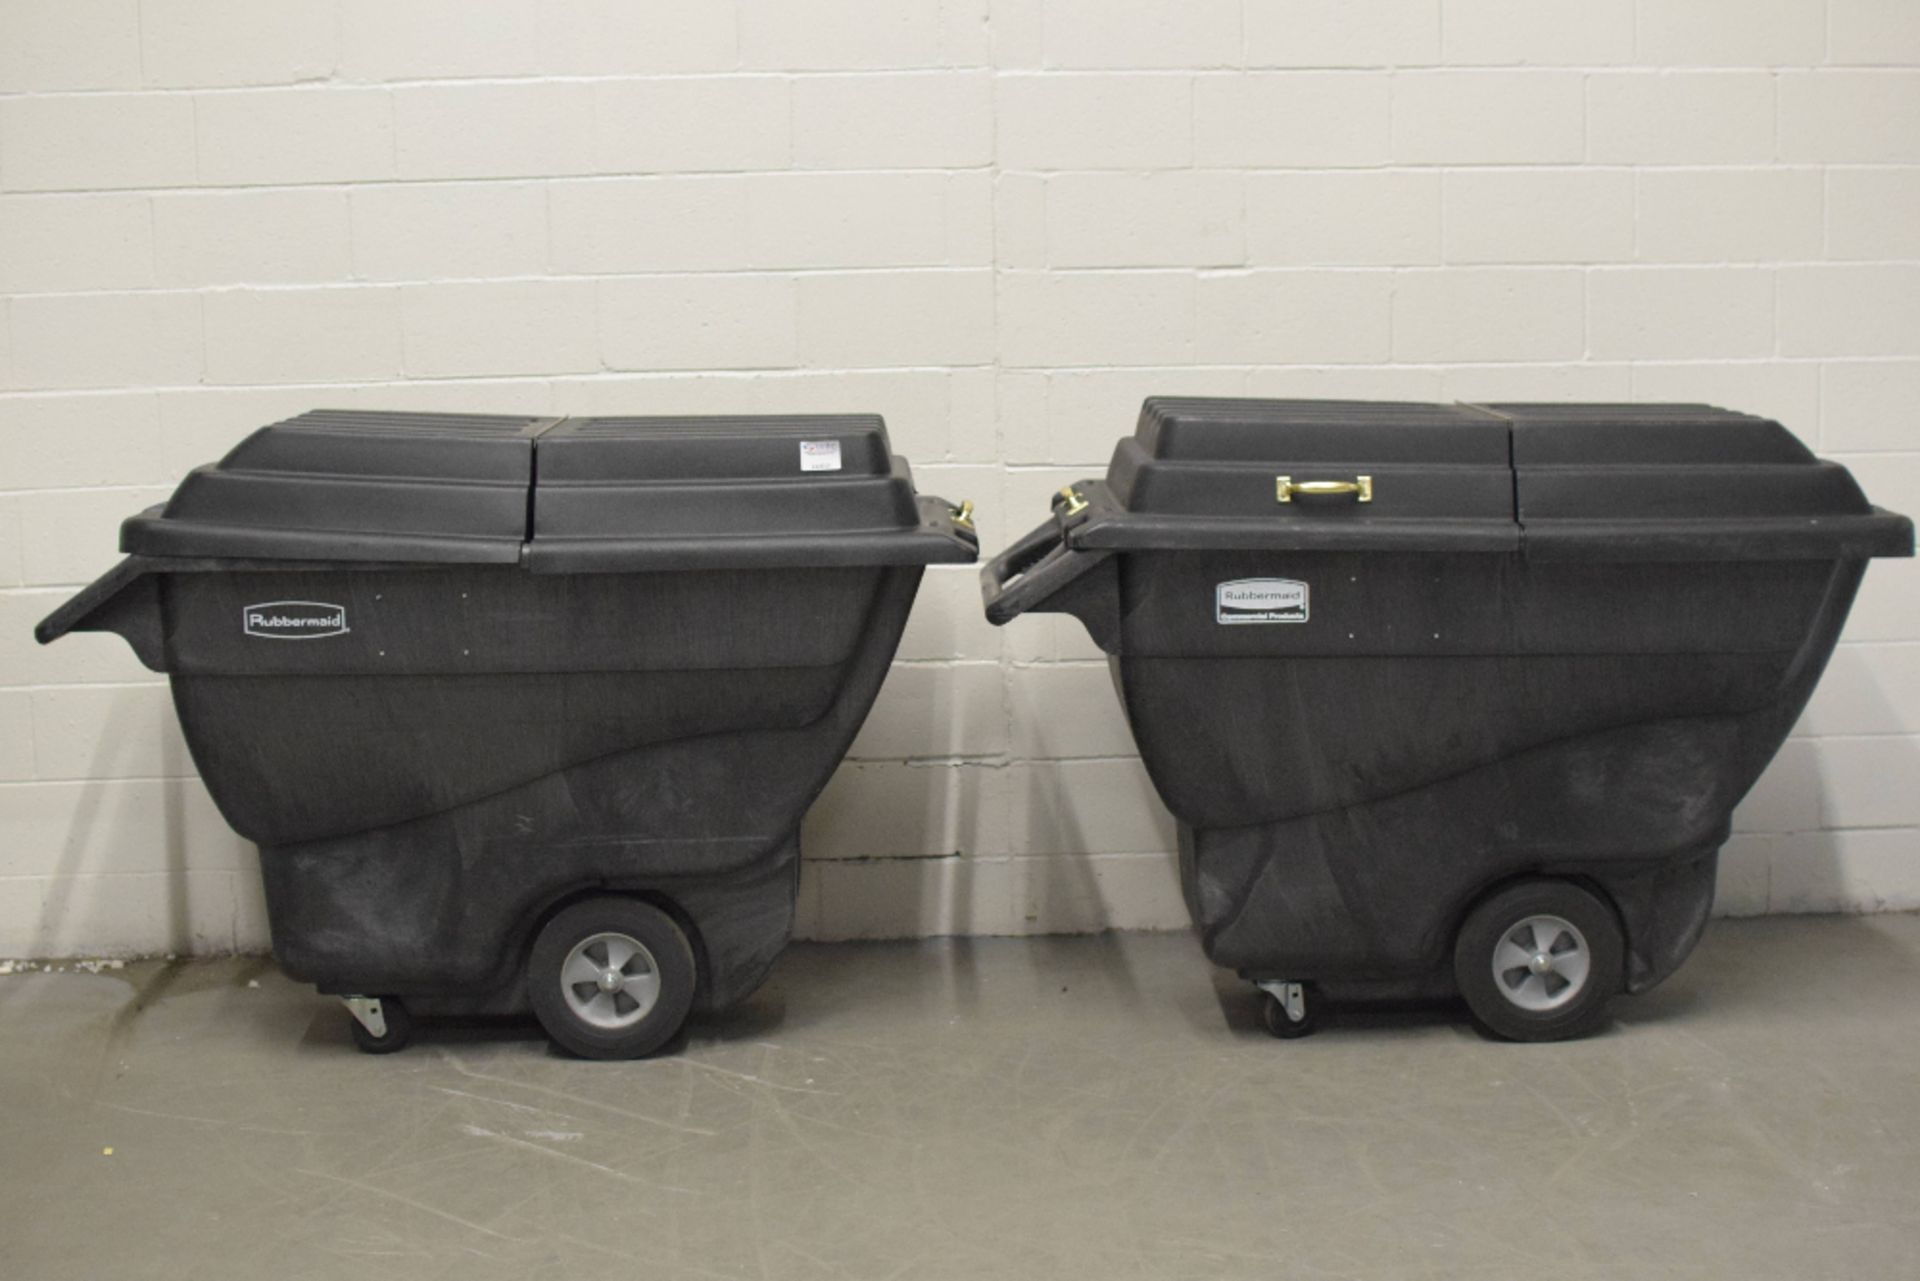 Lot of (2) Rubbermaid Commercial Trash Bins